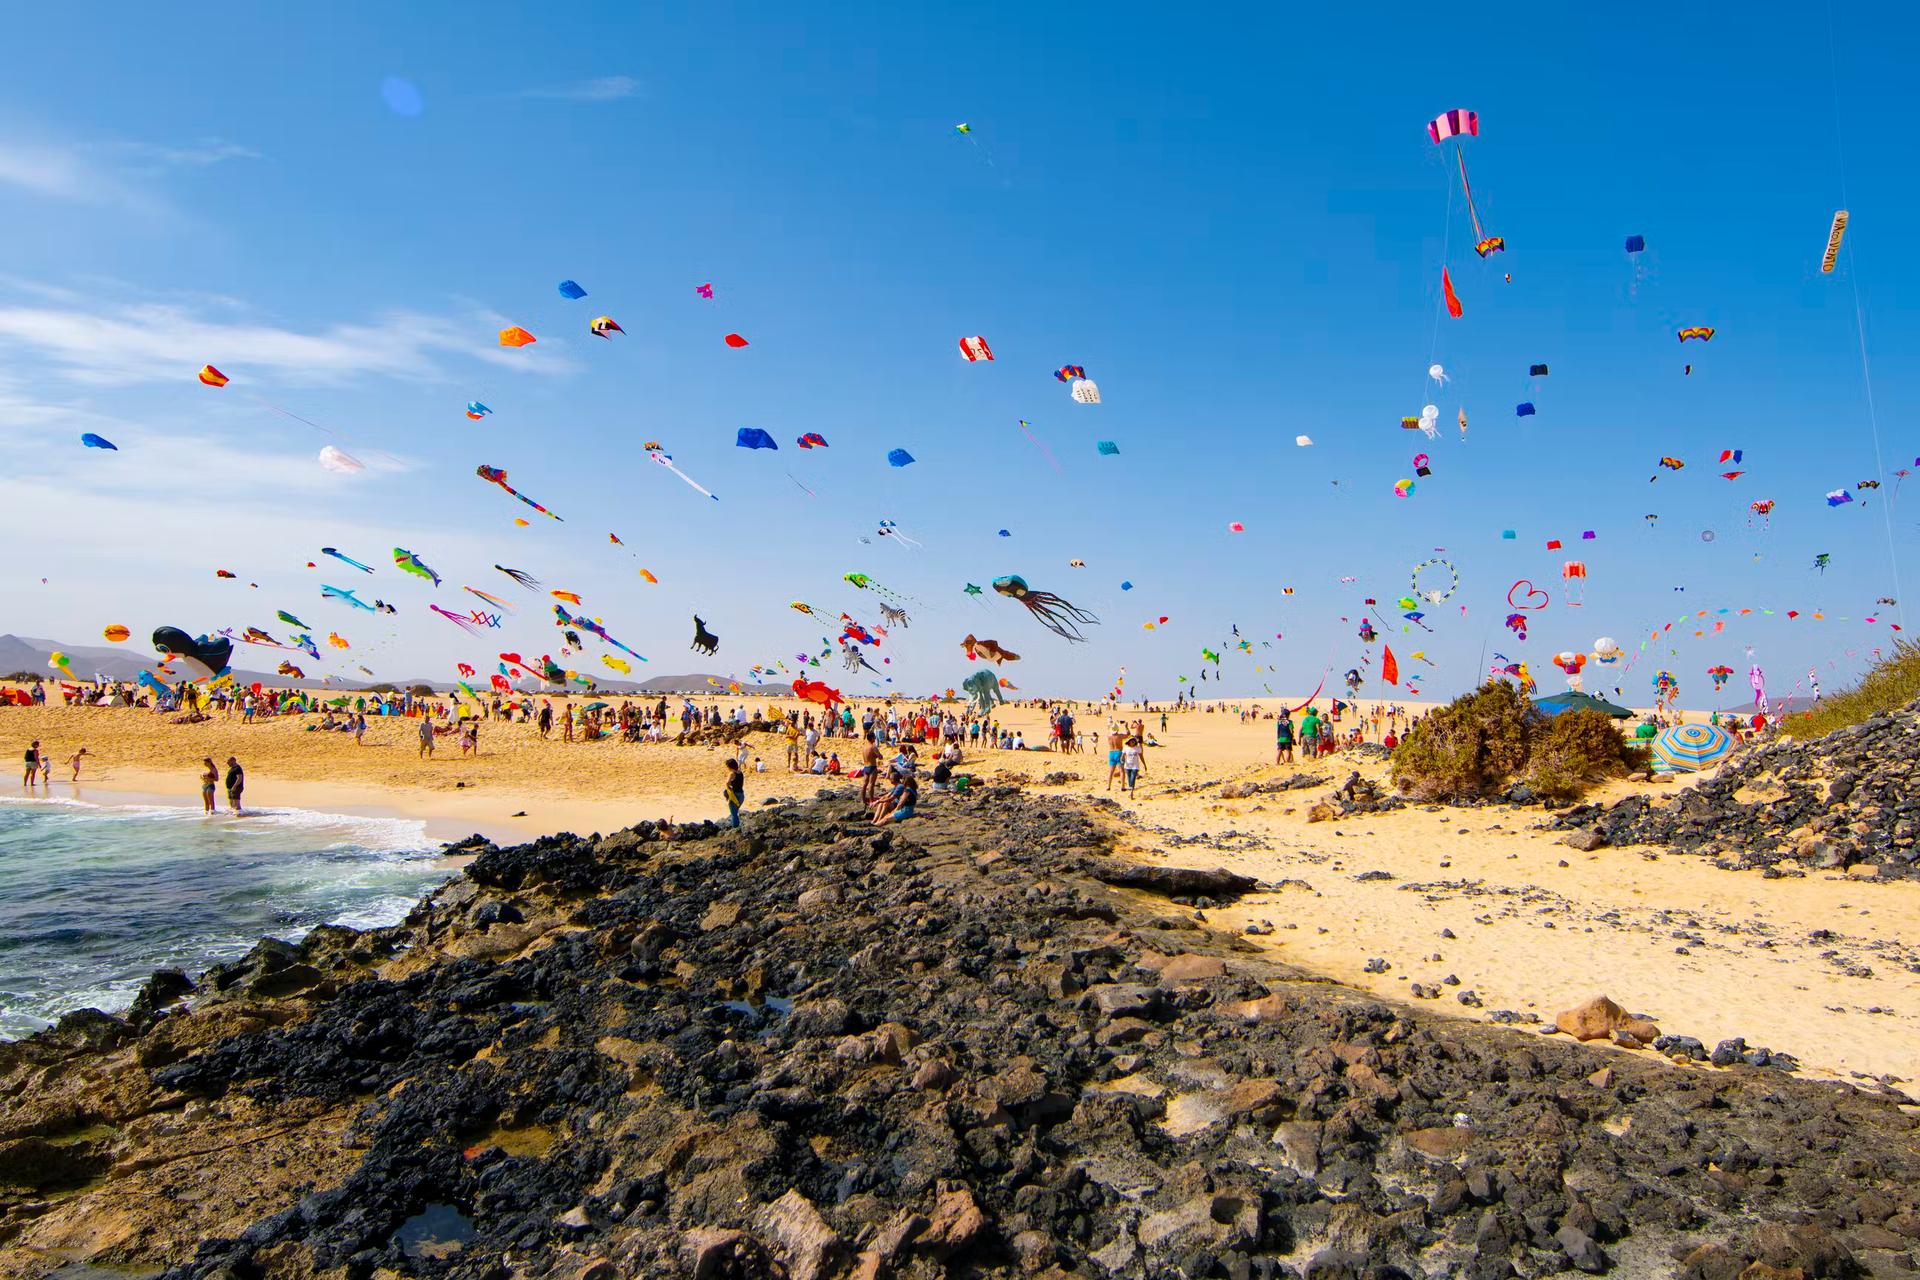 Hundreds of colourful kites being flown on the sandy beach on a windy day; there is a rocky outcrop in the foreground.